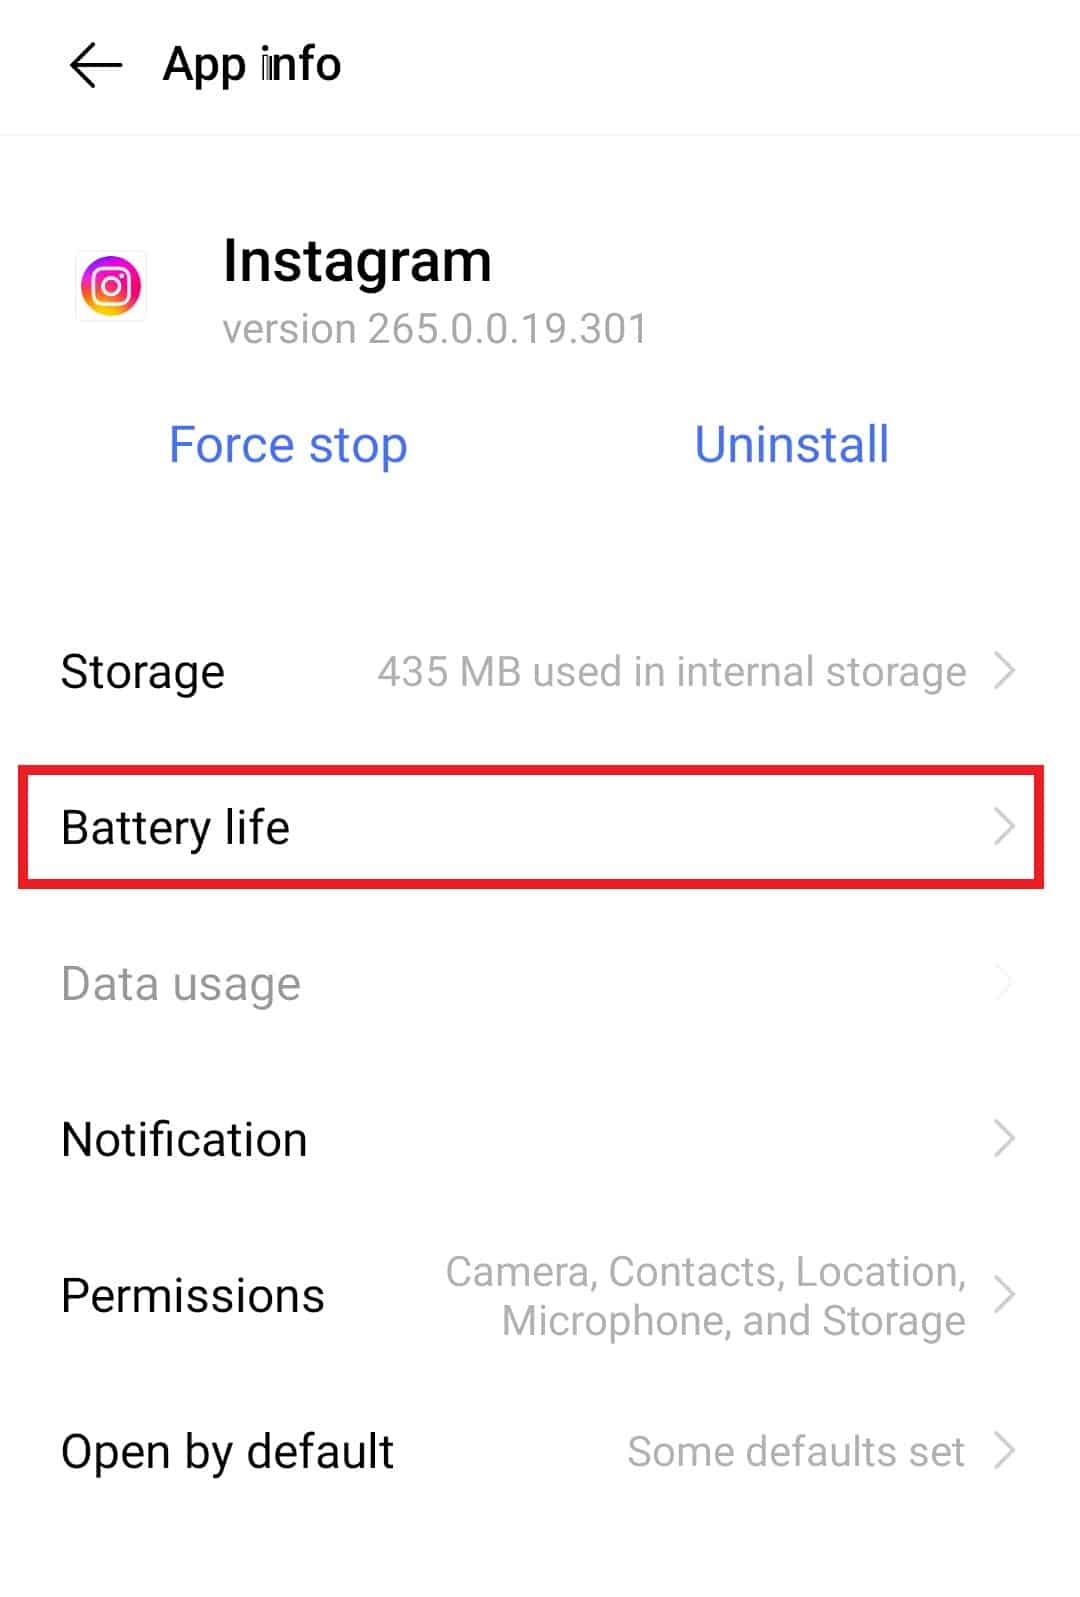 Tap on Battery life